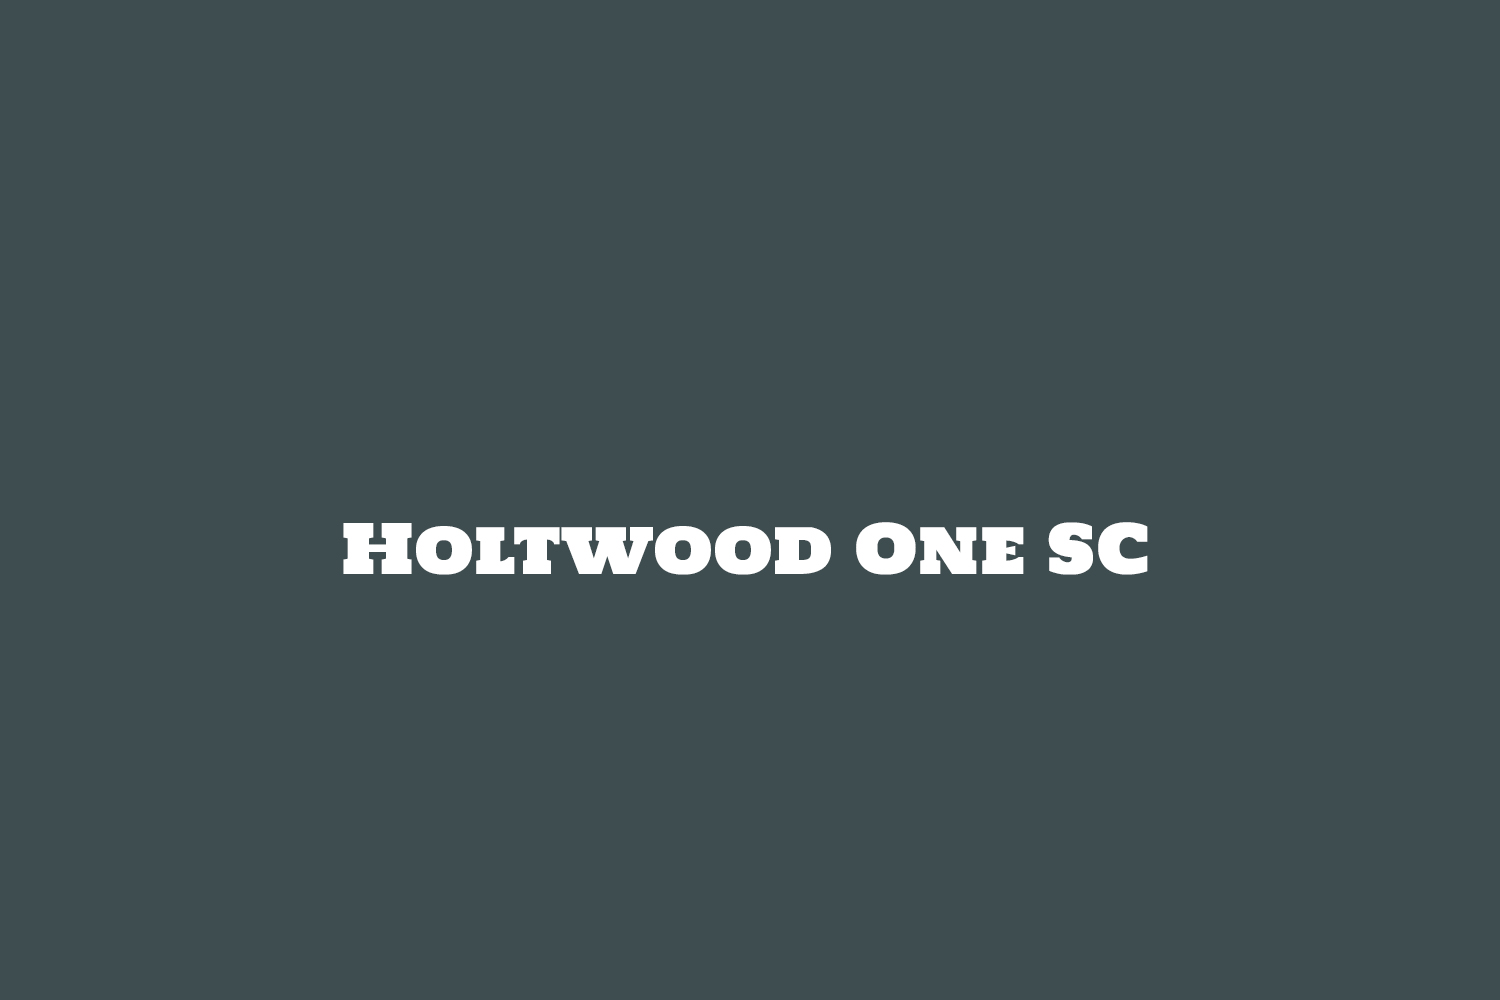 Holtwood One SC